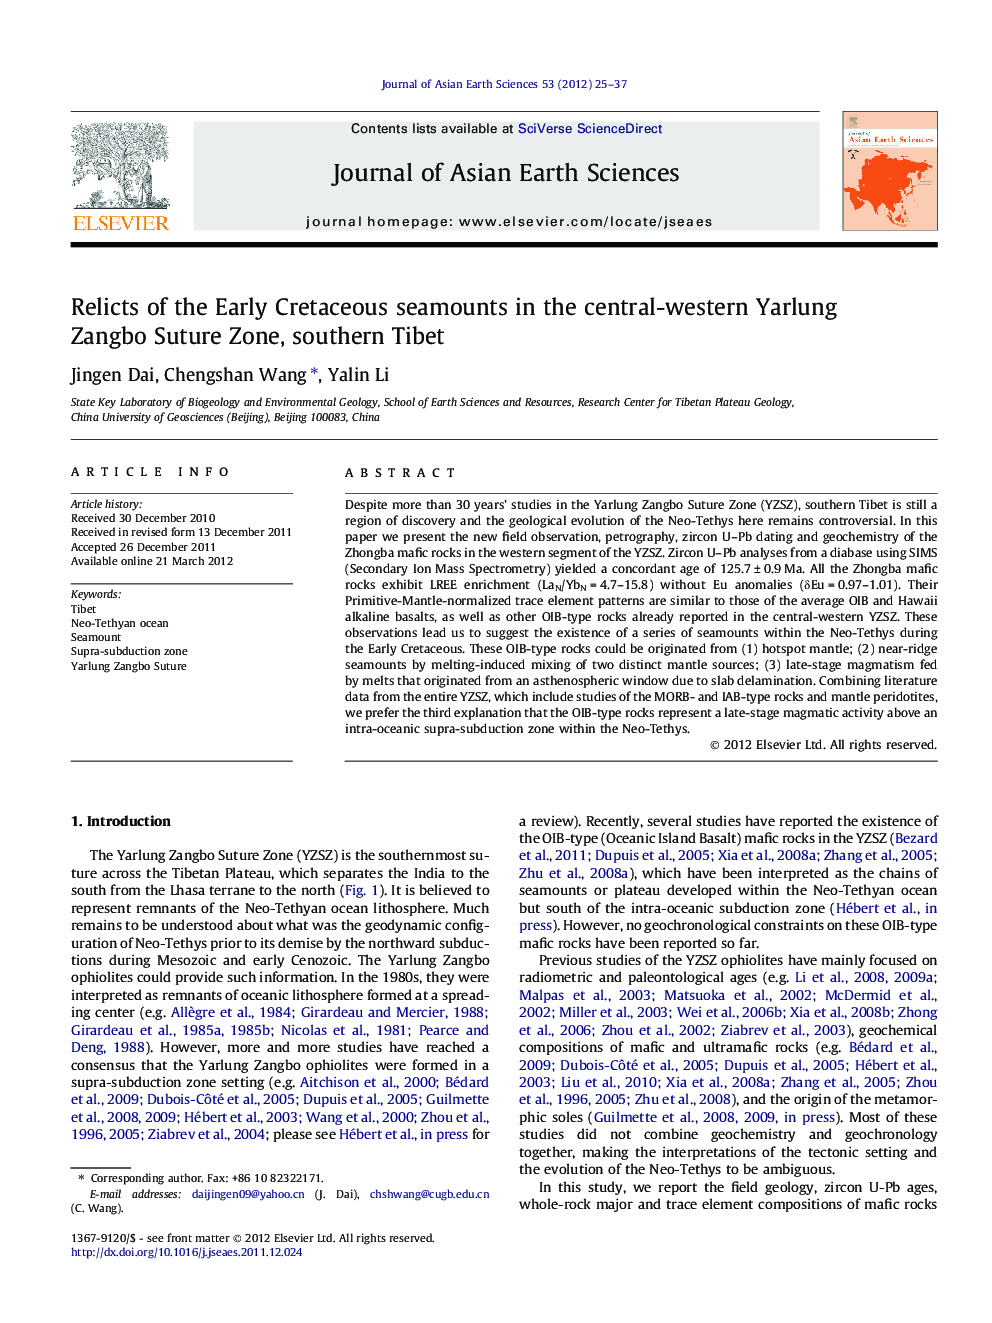 Relicts of the Early Cretaceous seamounts in the central-western Yarlung Zangbo Suture Zone, southern Tibet